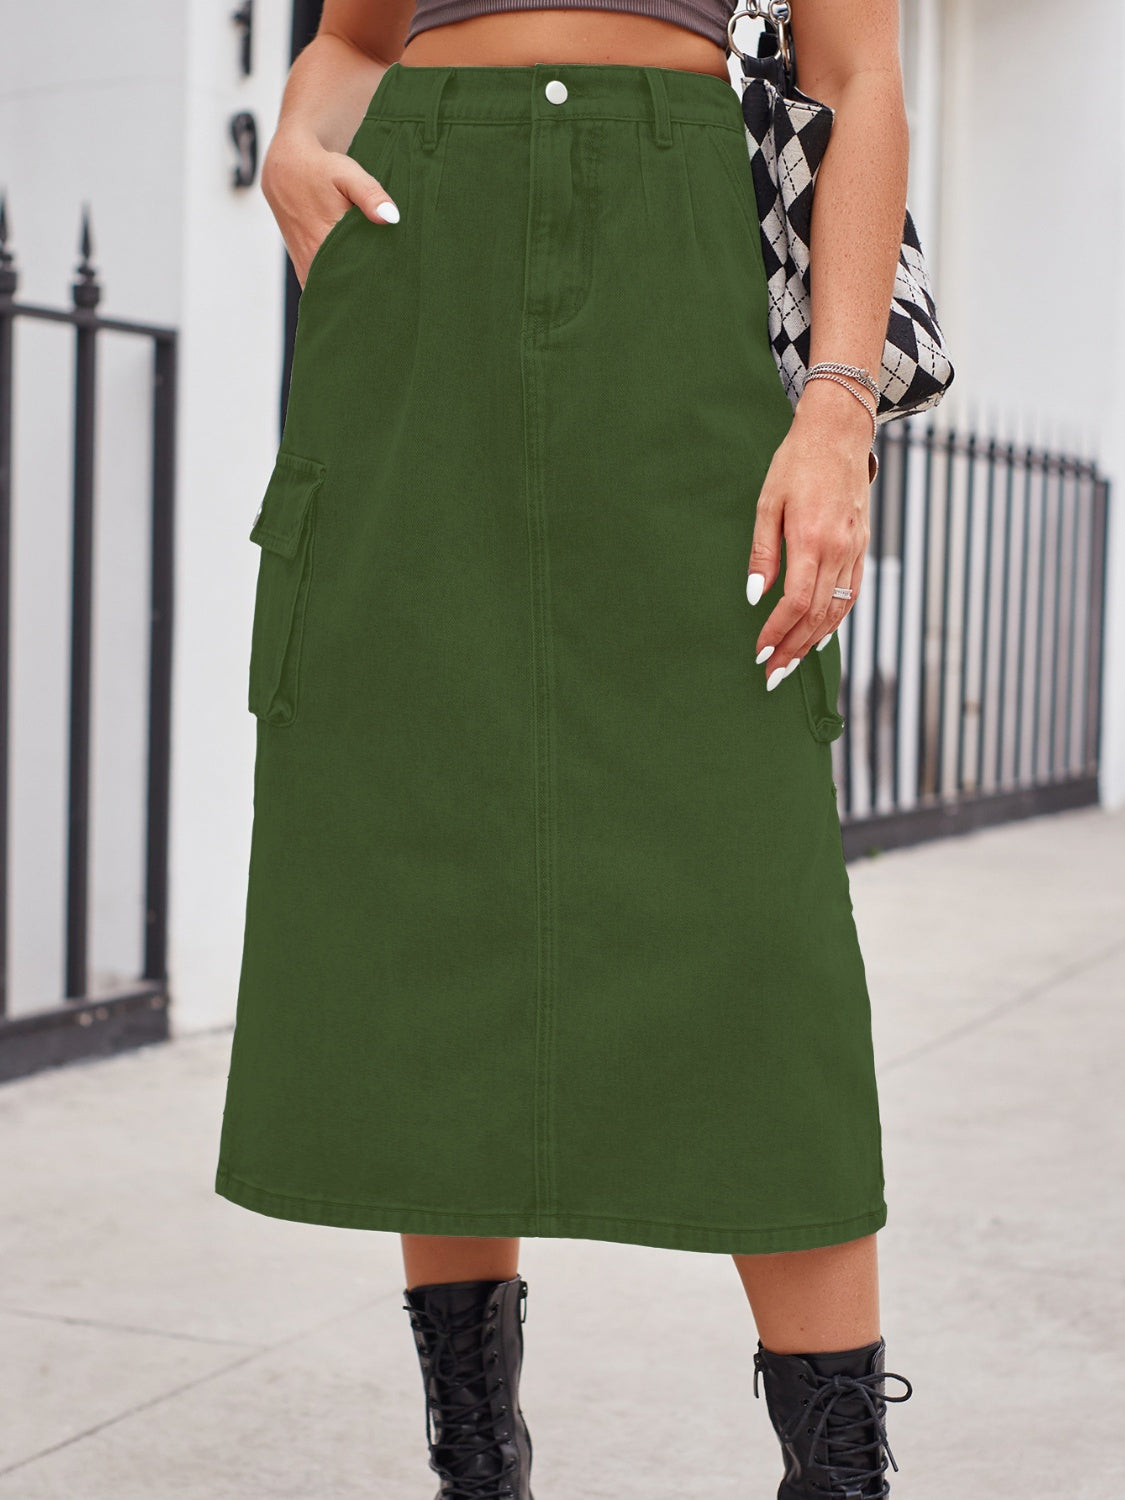 Slit Buttoned Denim Skirt with Pockets  Sunset and Swim Army Green S 